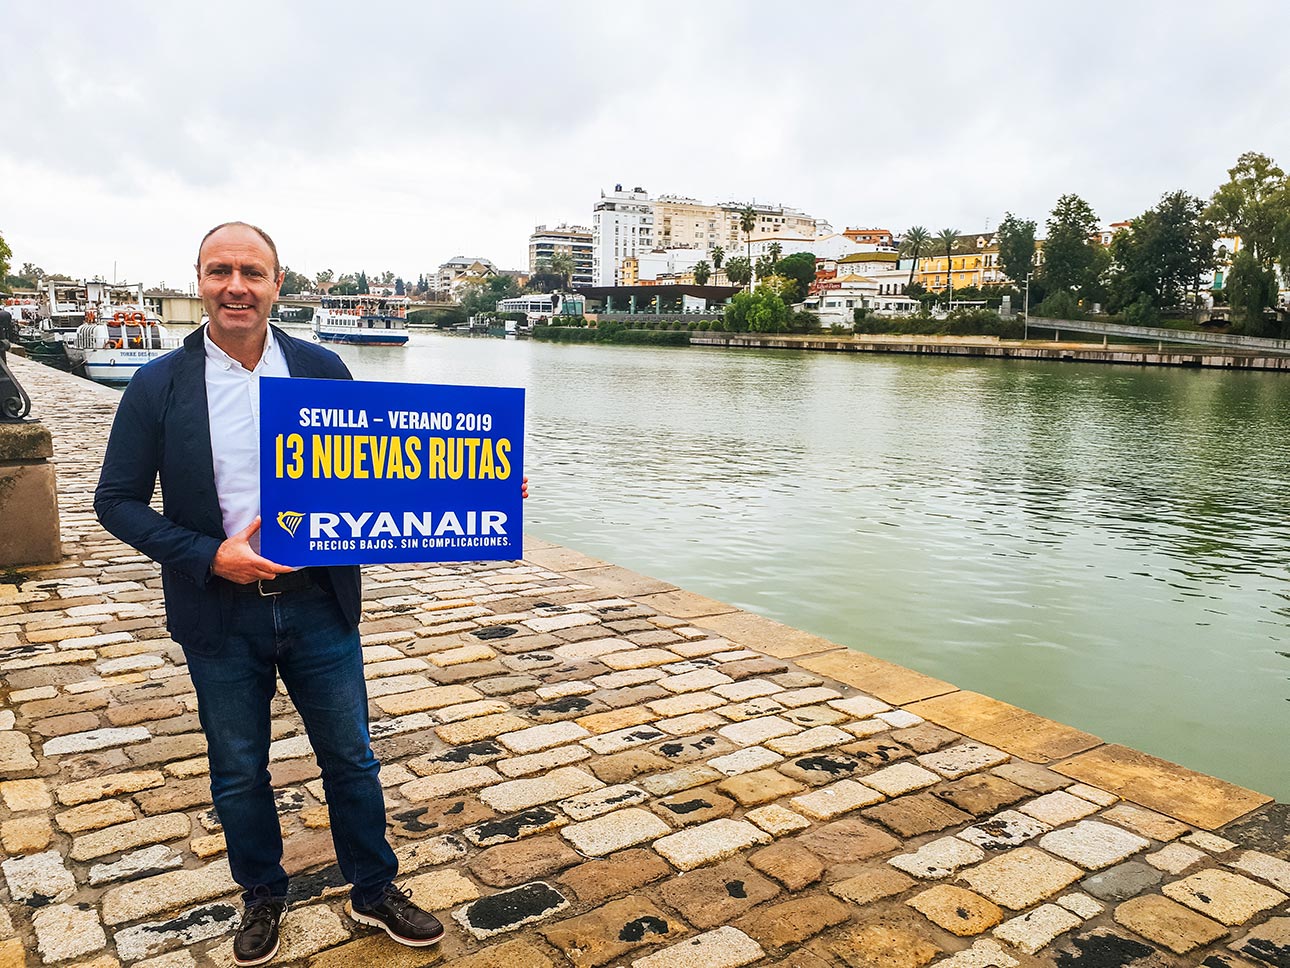 Ryanair Announces 13 New Seville S19 Routes   53 Routes In Total, 2.8m Customers, 10% Growth